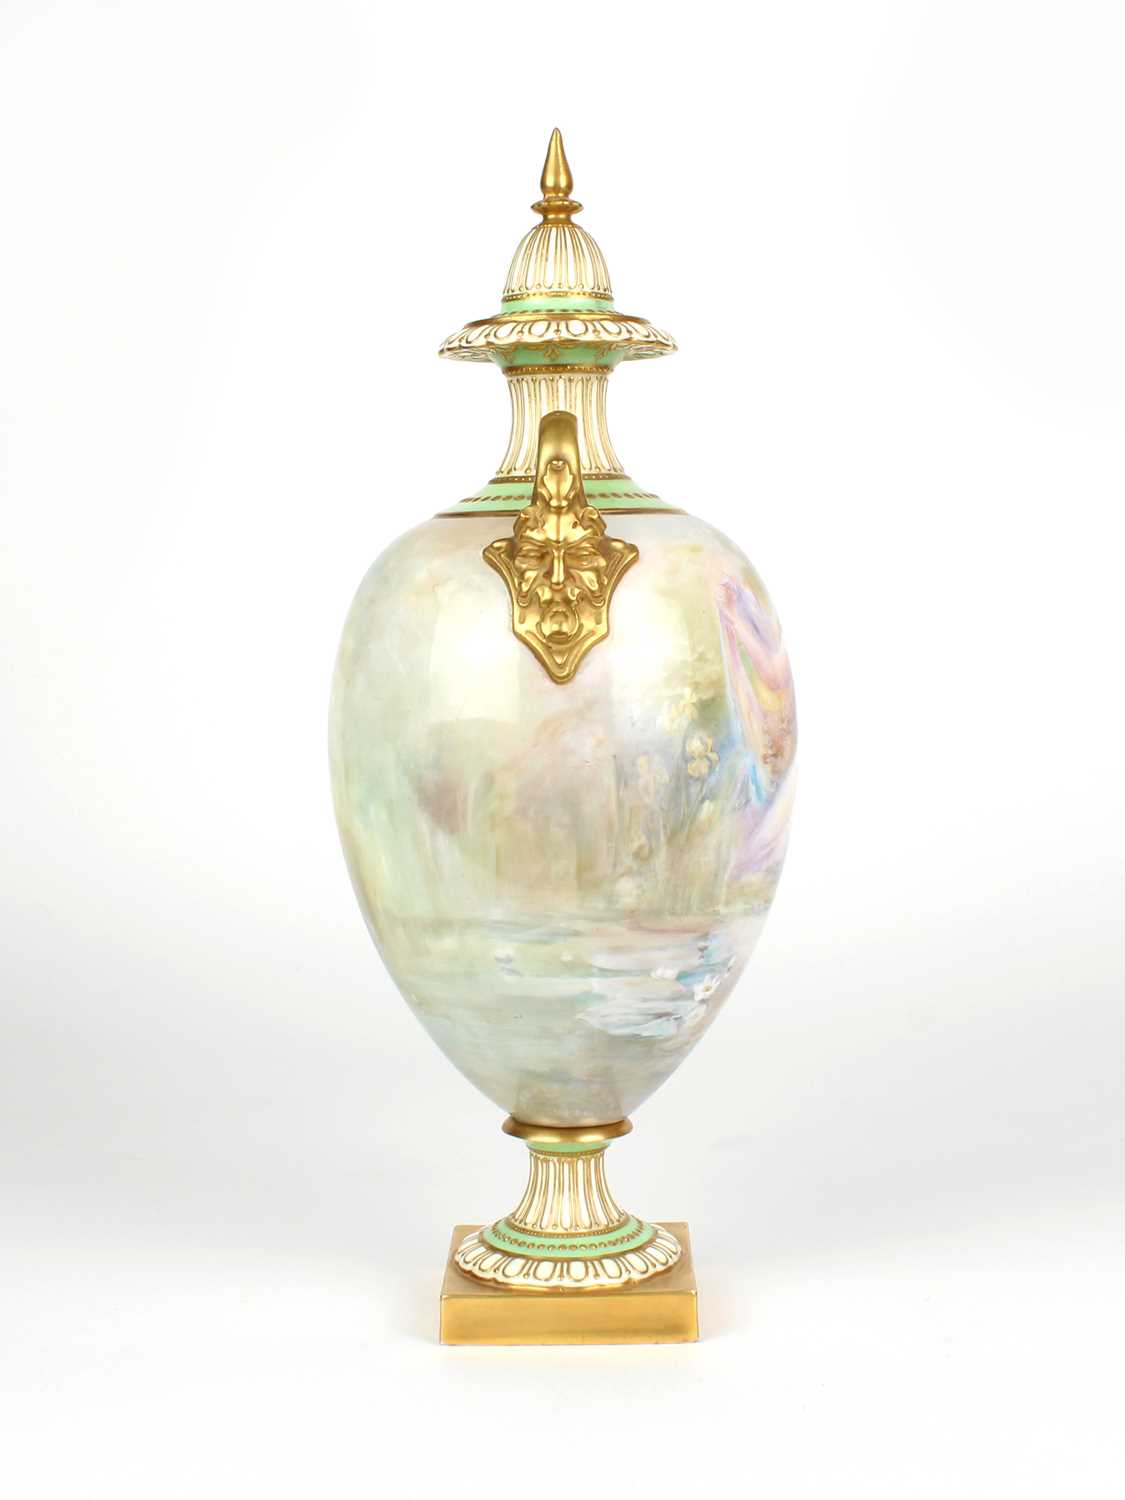 George White for Royal Doulton "Leda and the Swan" Urn - Image 7 of 20